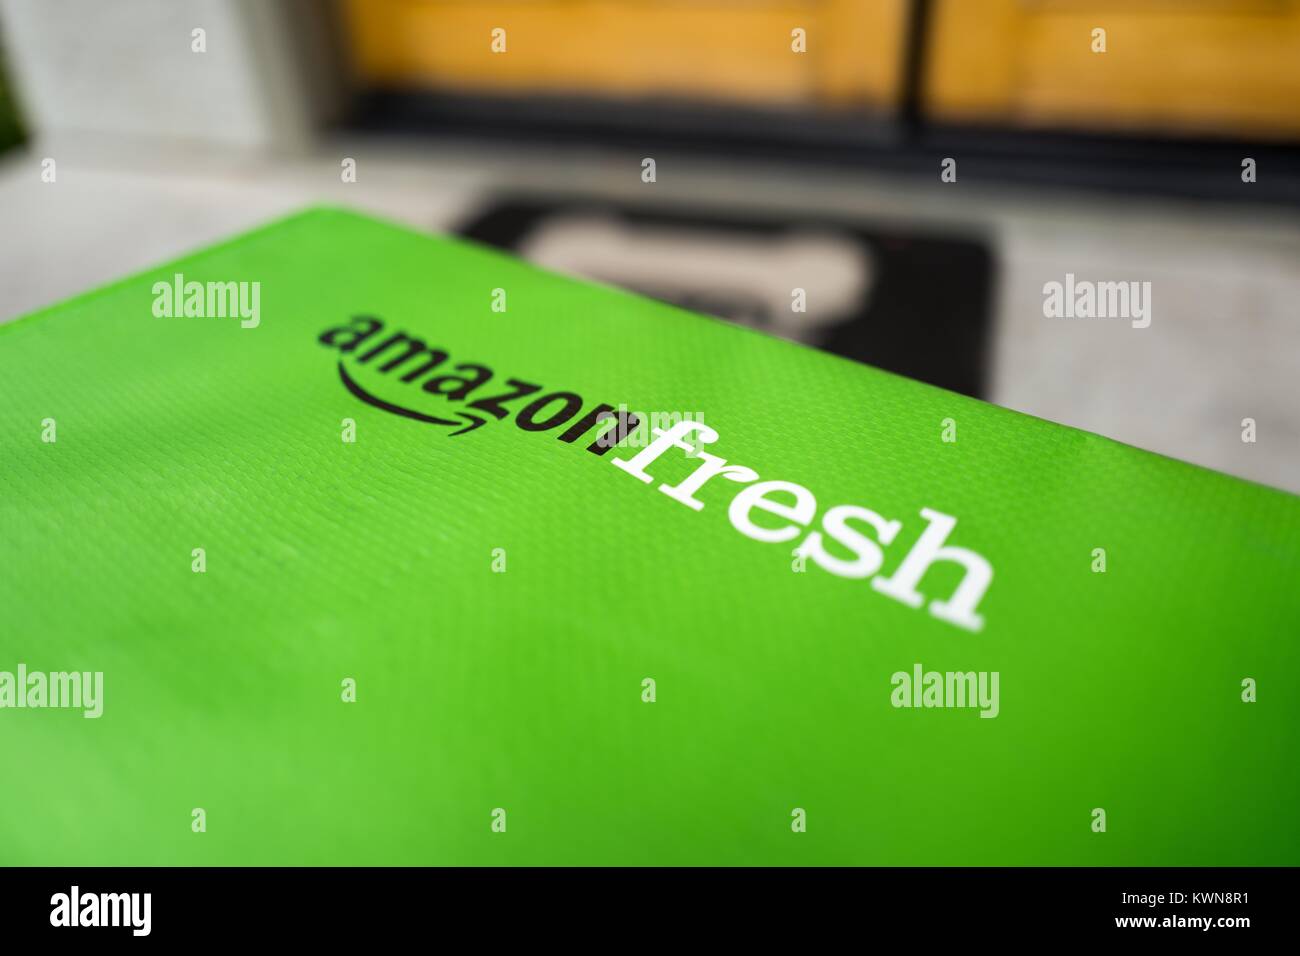 Green cold pack tote for Amazon Fresh grocery delivery service, with Amazon logo and text listing groceries which may be ordered using the service, on the doorstep of a suburban home in the San Francisco Bay Area town of San Ramon, California, April 11, 2017. In June of 2017, Amazon announced that it would acquire the upscale grocery chain Whole Foods Market to expand its offerings in the grocery industry. Stock Photo